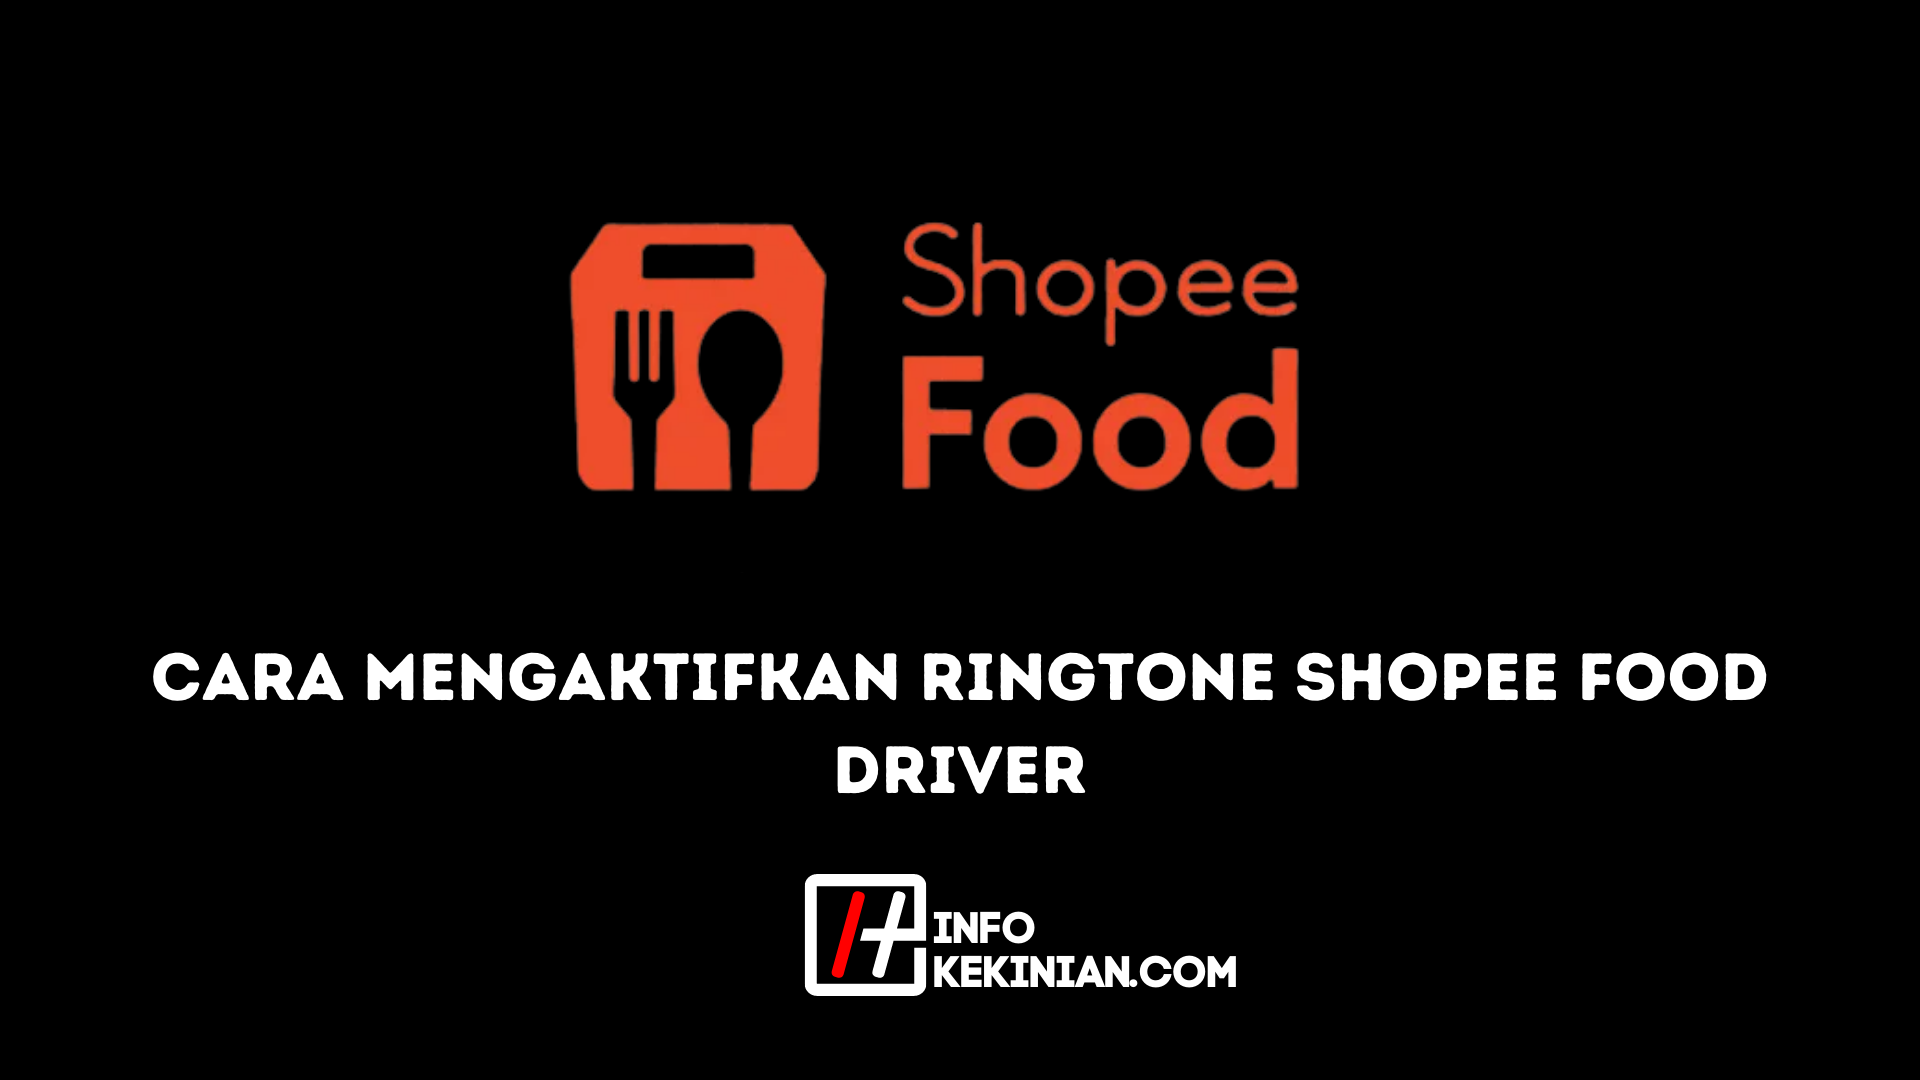 How to Activate the Shopee Food Driver Ringtone